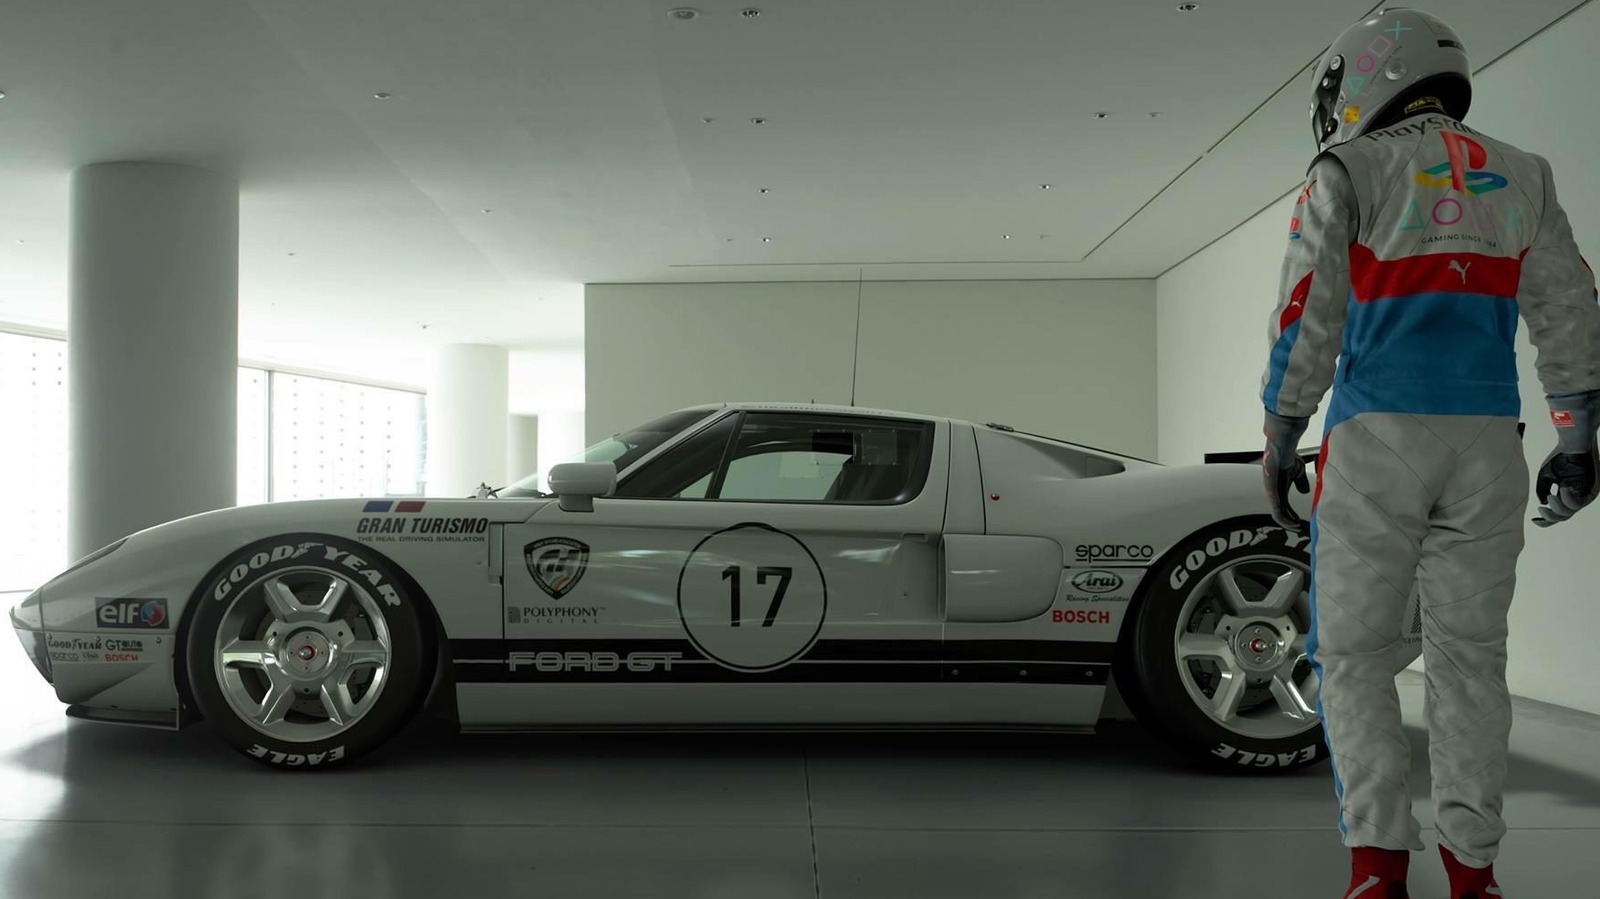 Gran Turismo 4' Cheat Codes Discovered 18 Years After Release